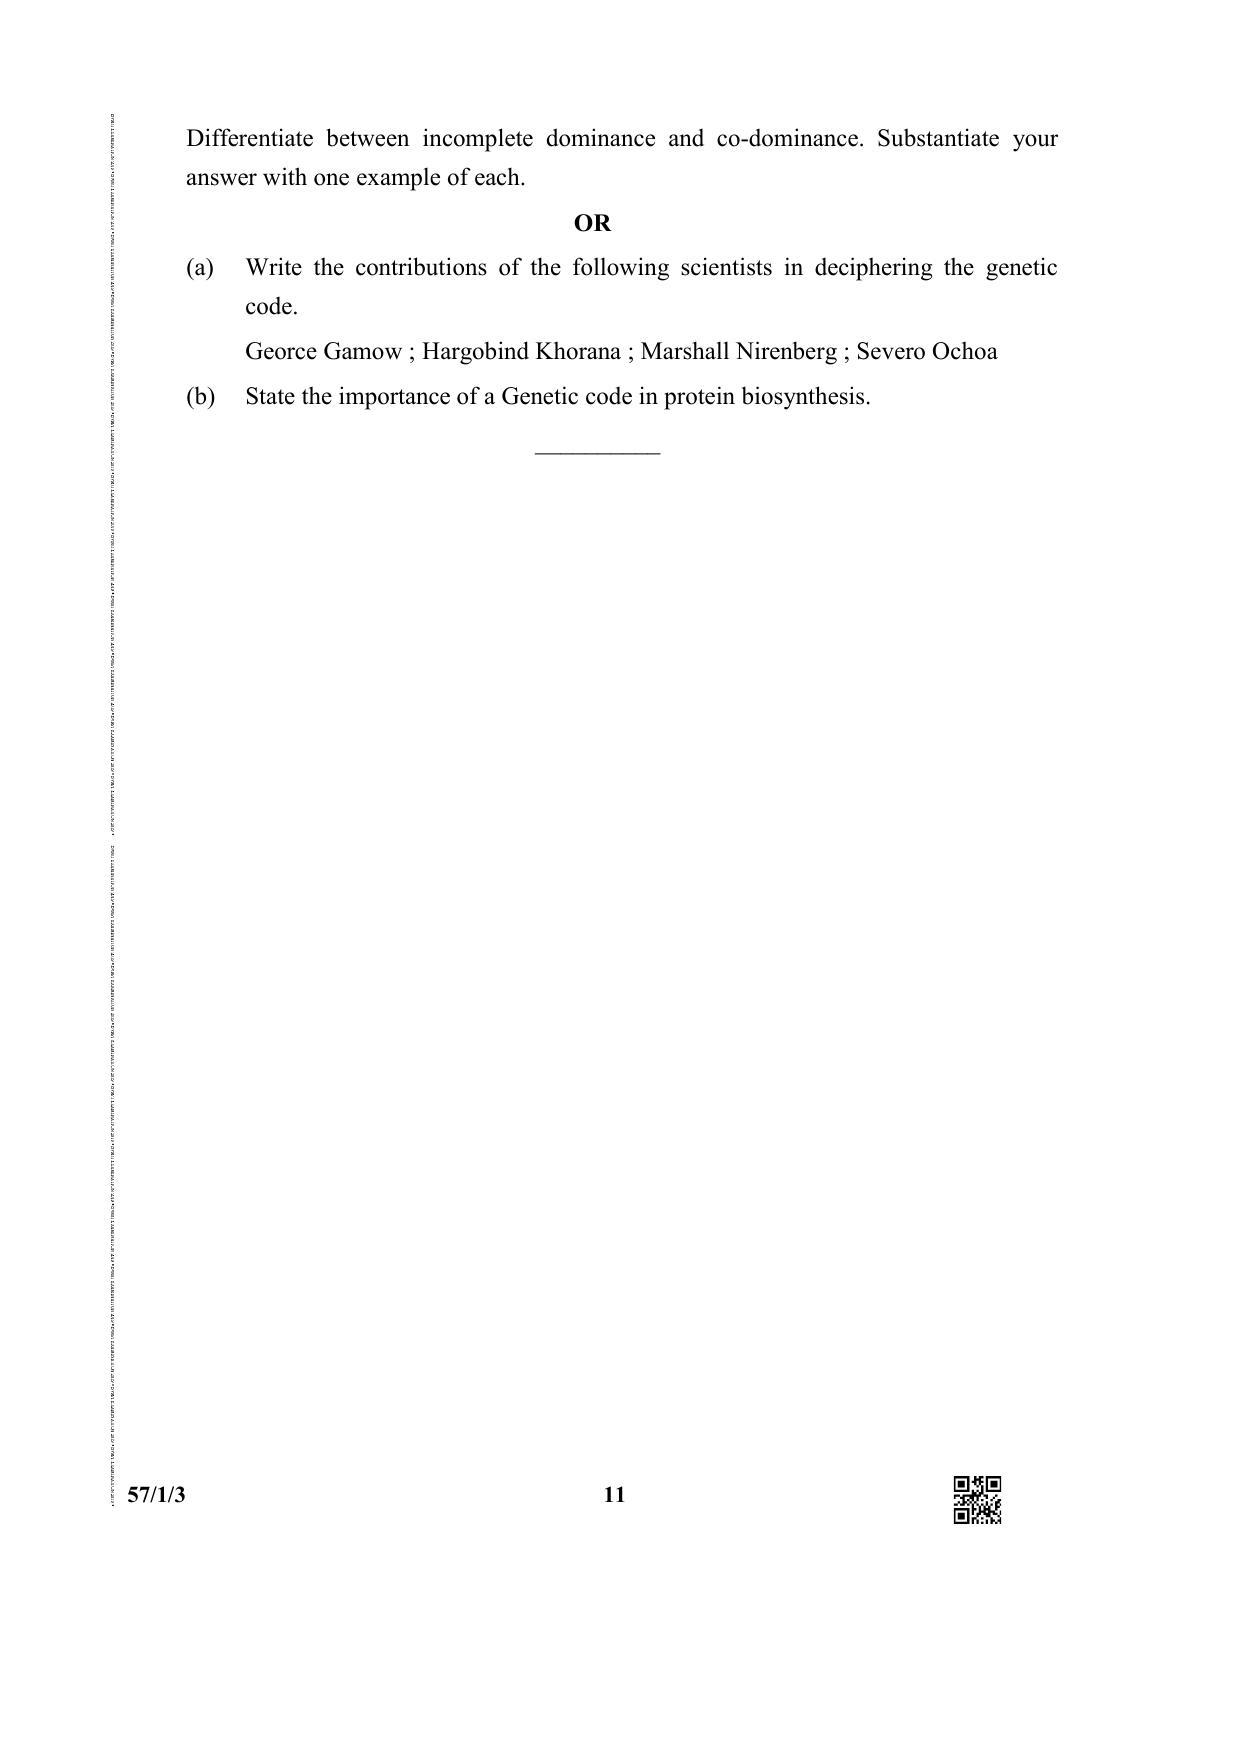 CBSE Class 12 57-3 (Biology) 2019 Question Paper - Page 11